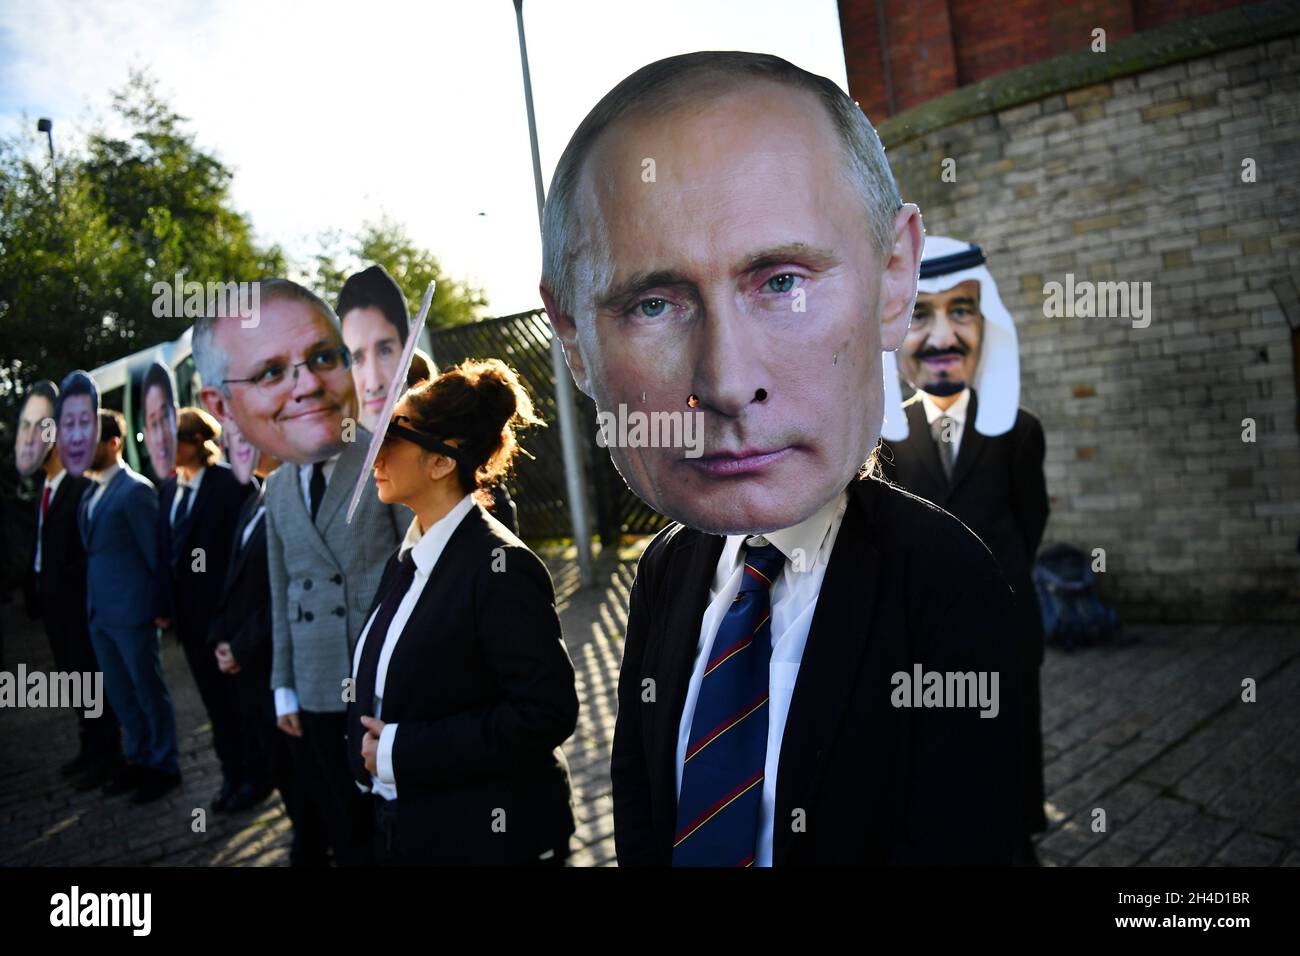 Climate activists dressed as world leaders prepare to take part in a media event during the UN Climate Change Conference (COP26) in Glasgow, Scotland, Britain November 2, 2021. REUTERS/Dylan Martinez Stock Photo